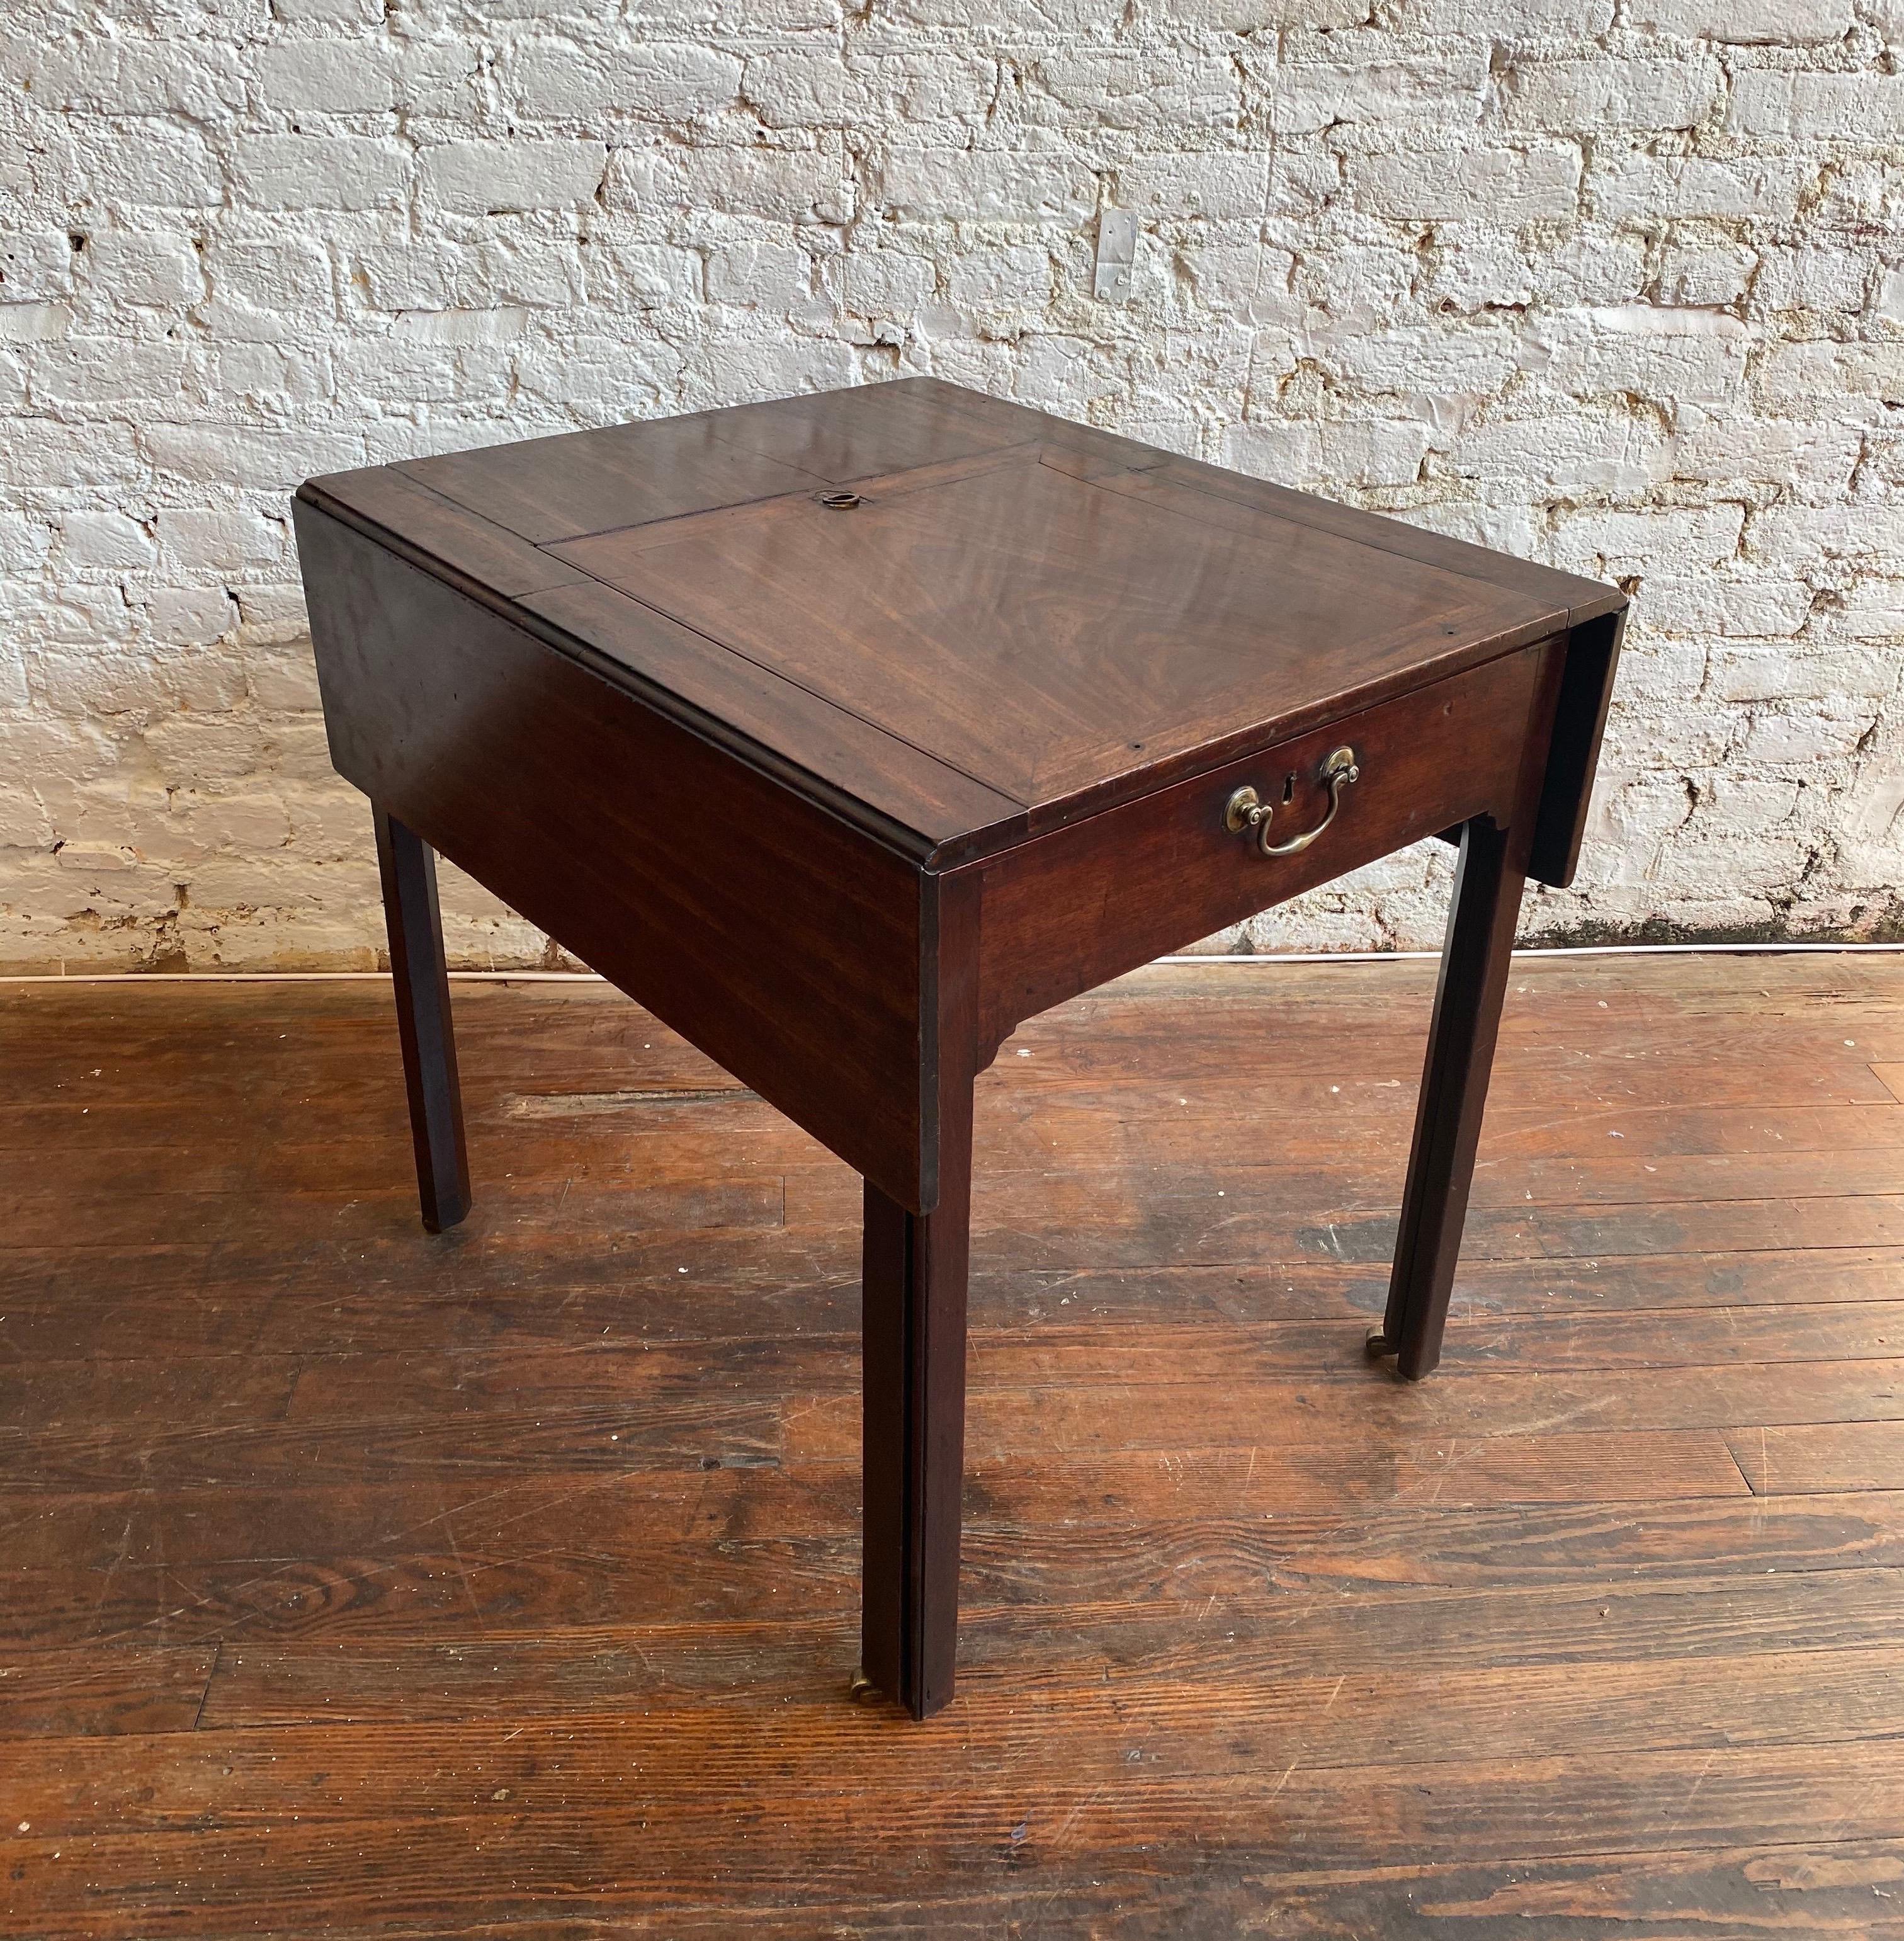 Great 18th century Georgian mahogany metamorphic architect's table. Drop-leaf form top over Marlborough legs with top lifting to 45 degrees. The front slides out on original brass castors to reveal wells and cubbies. Candle slide with carved bone